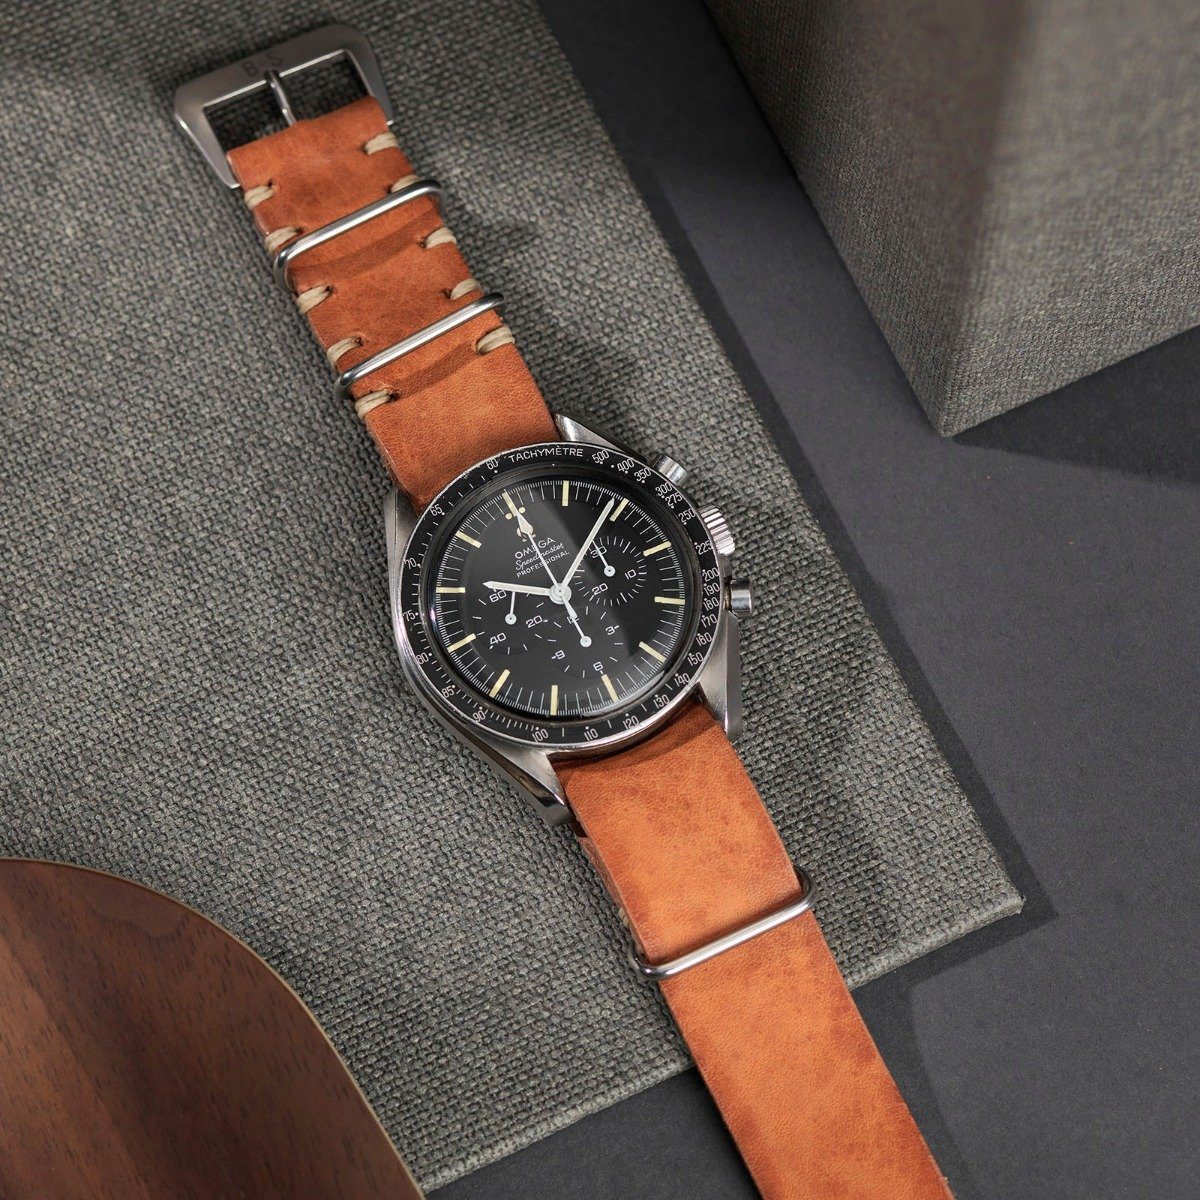 Omega Caramel Brown Nato Leather Watch Strap